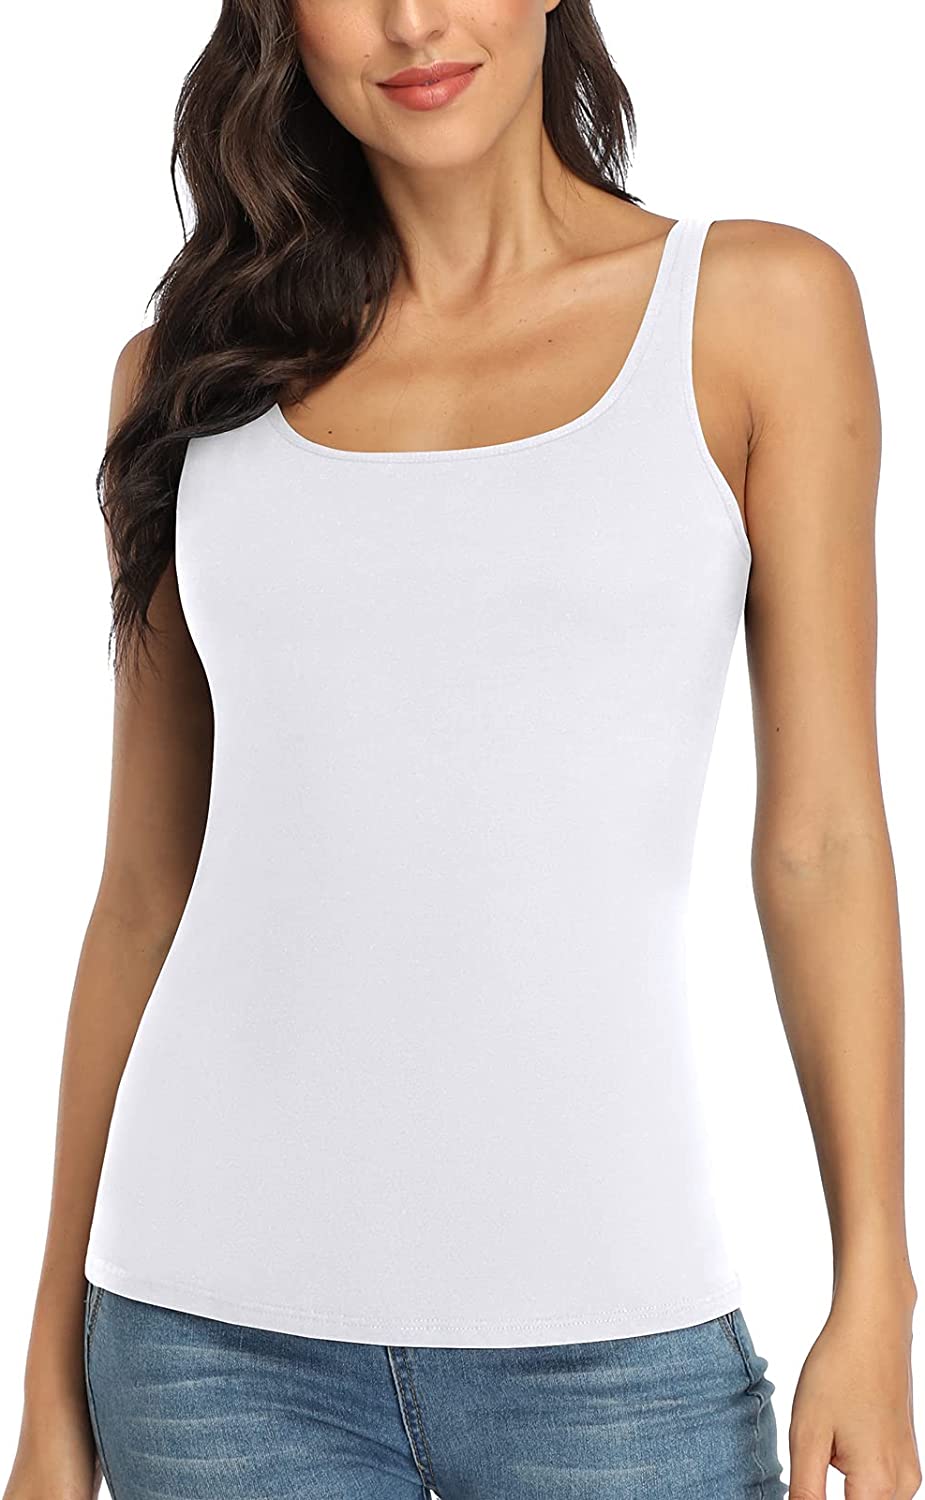 V FOR CITY Women's Cotton Tank Top with Shelf Bra Adjustable Wider Strap  Camisol